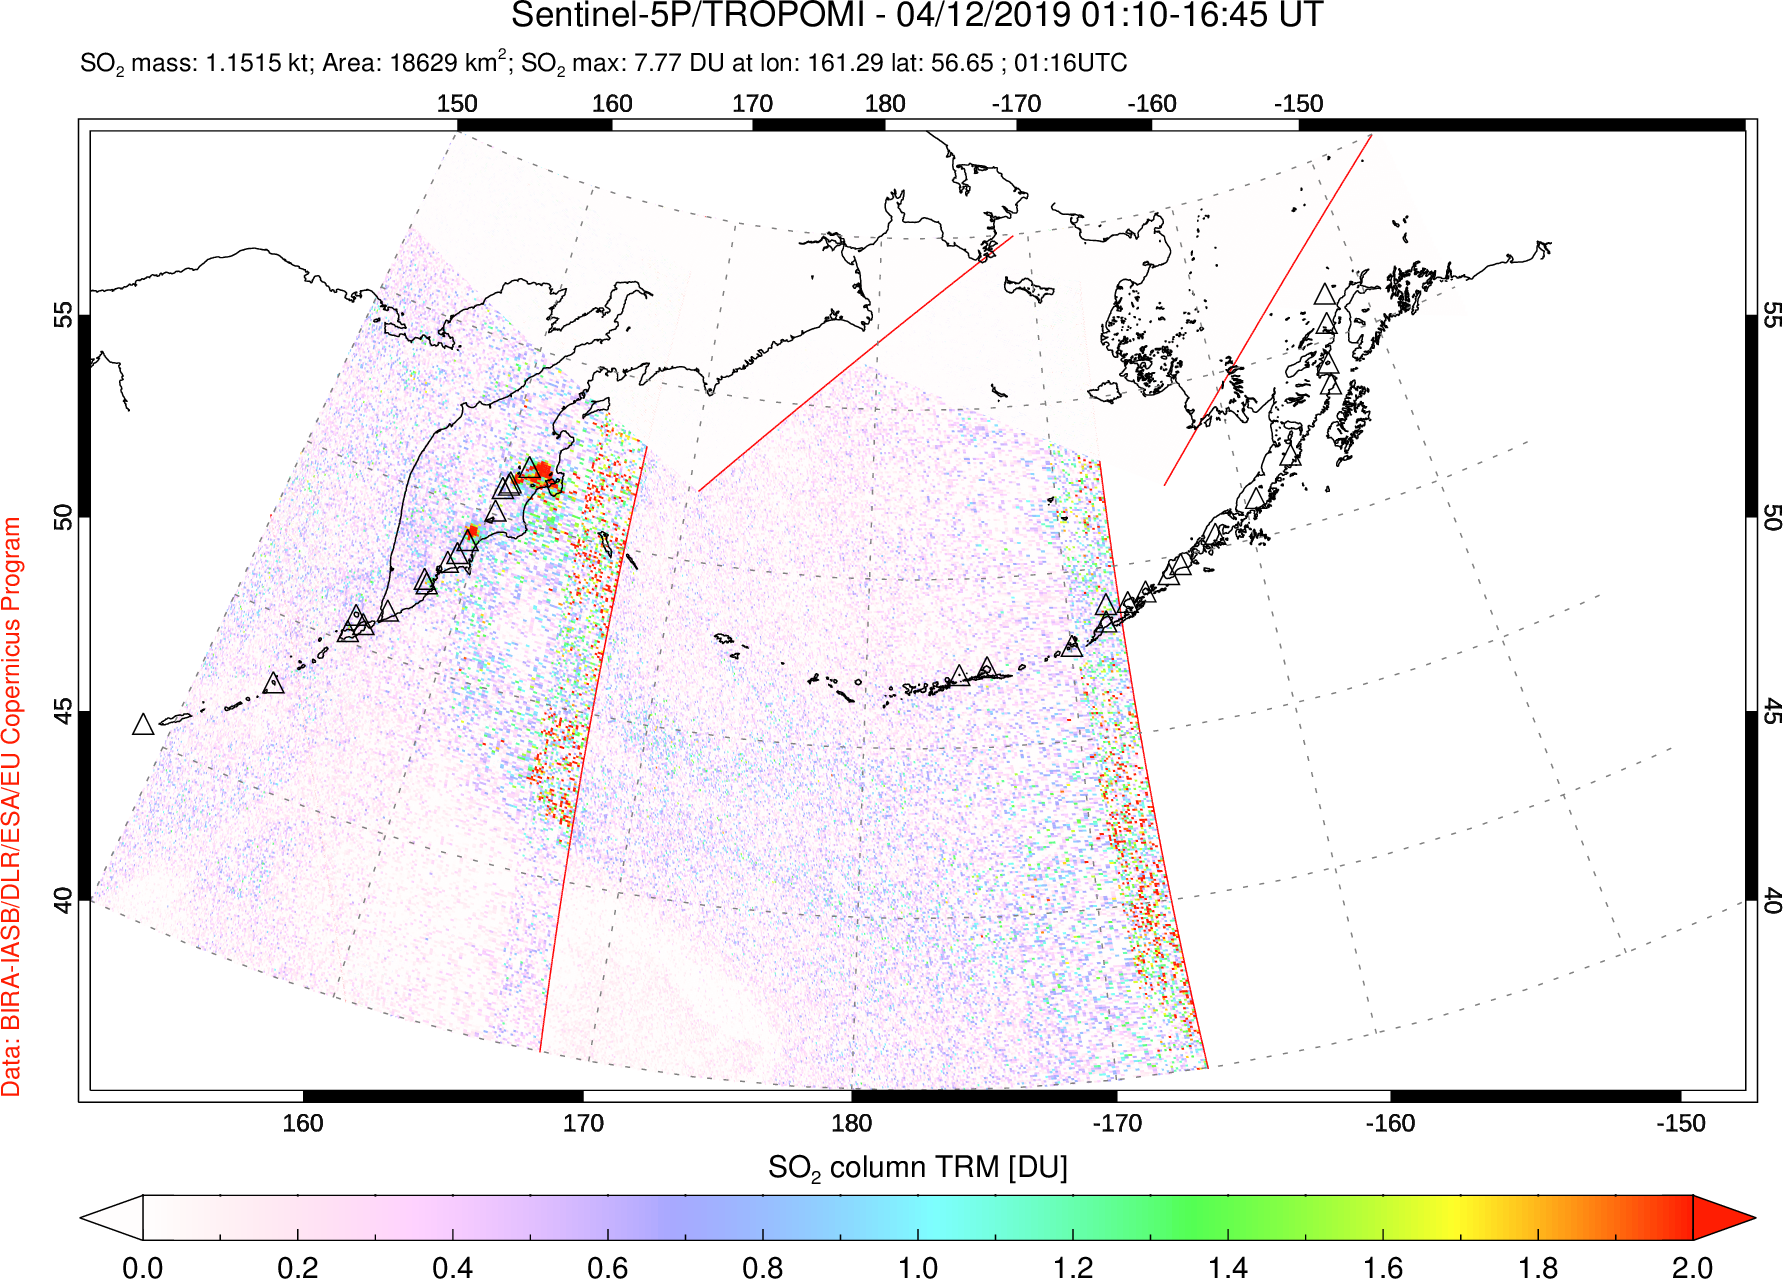 A sulfur dioxide image over North Pacific on Apr 12, 2019.